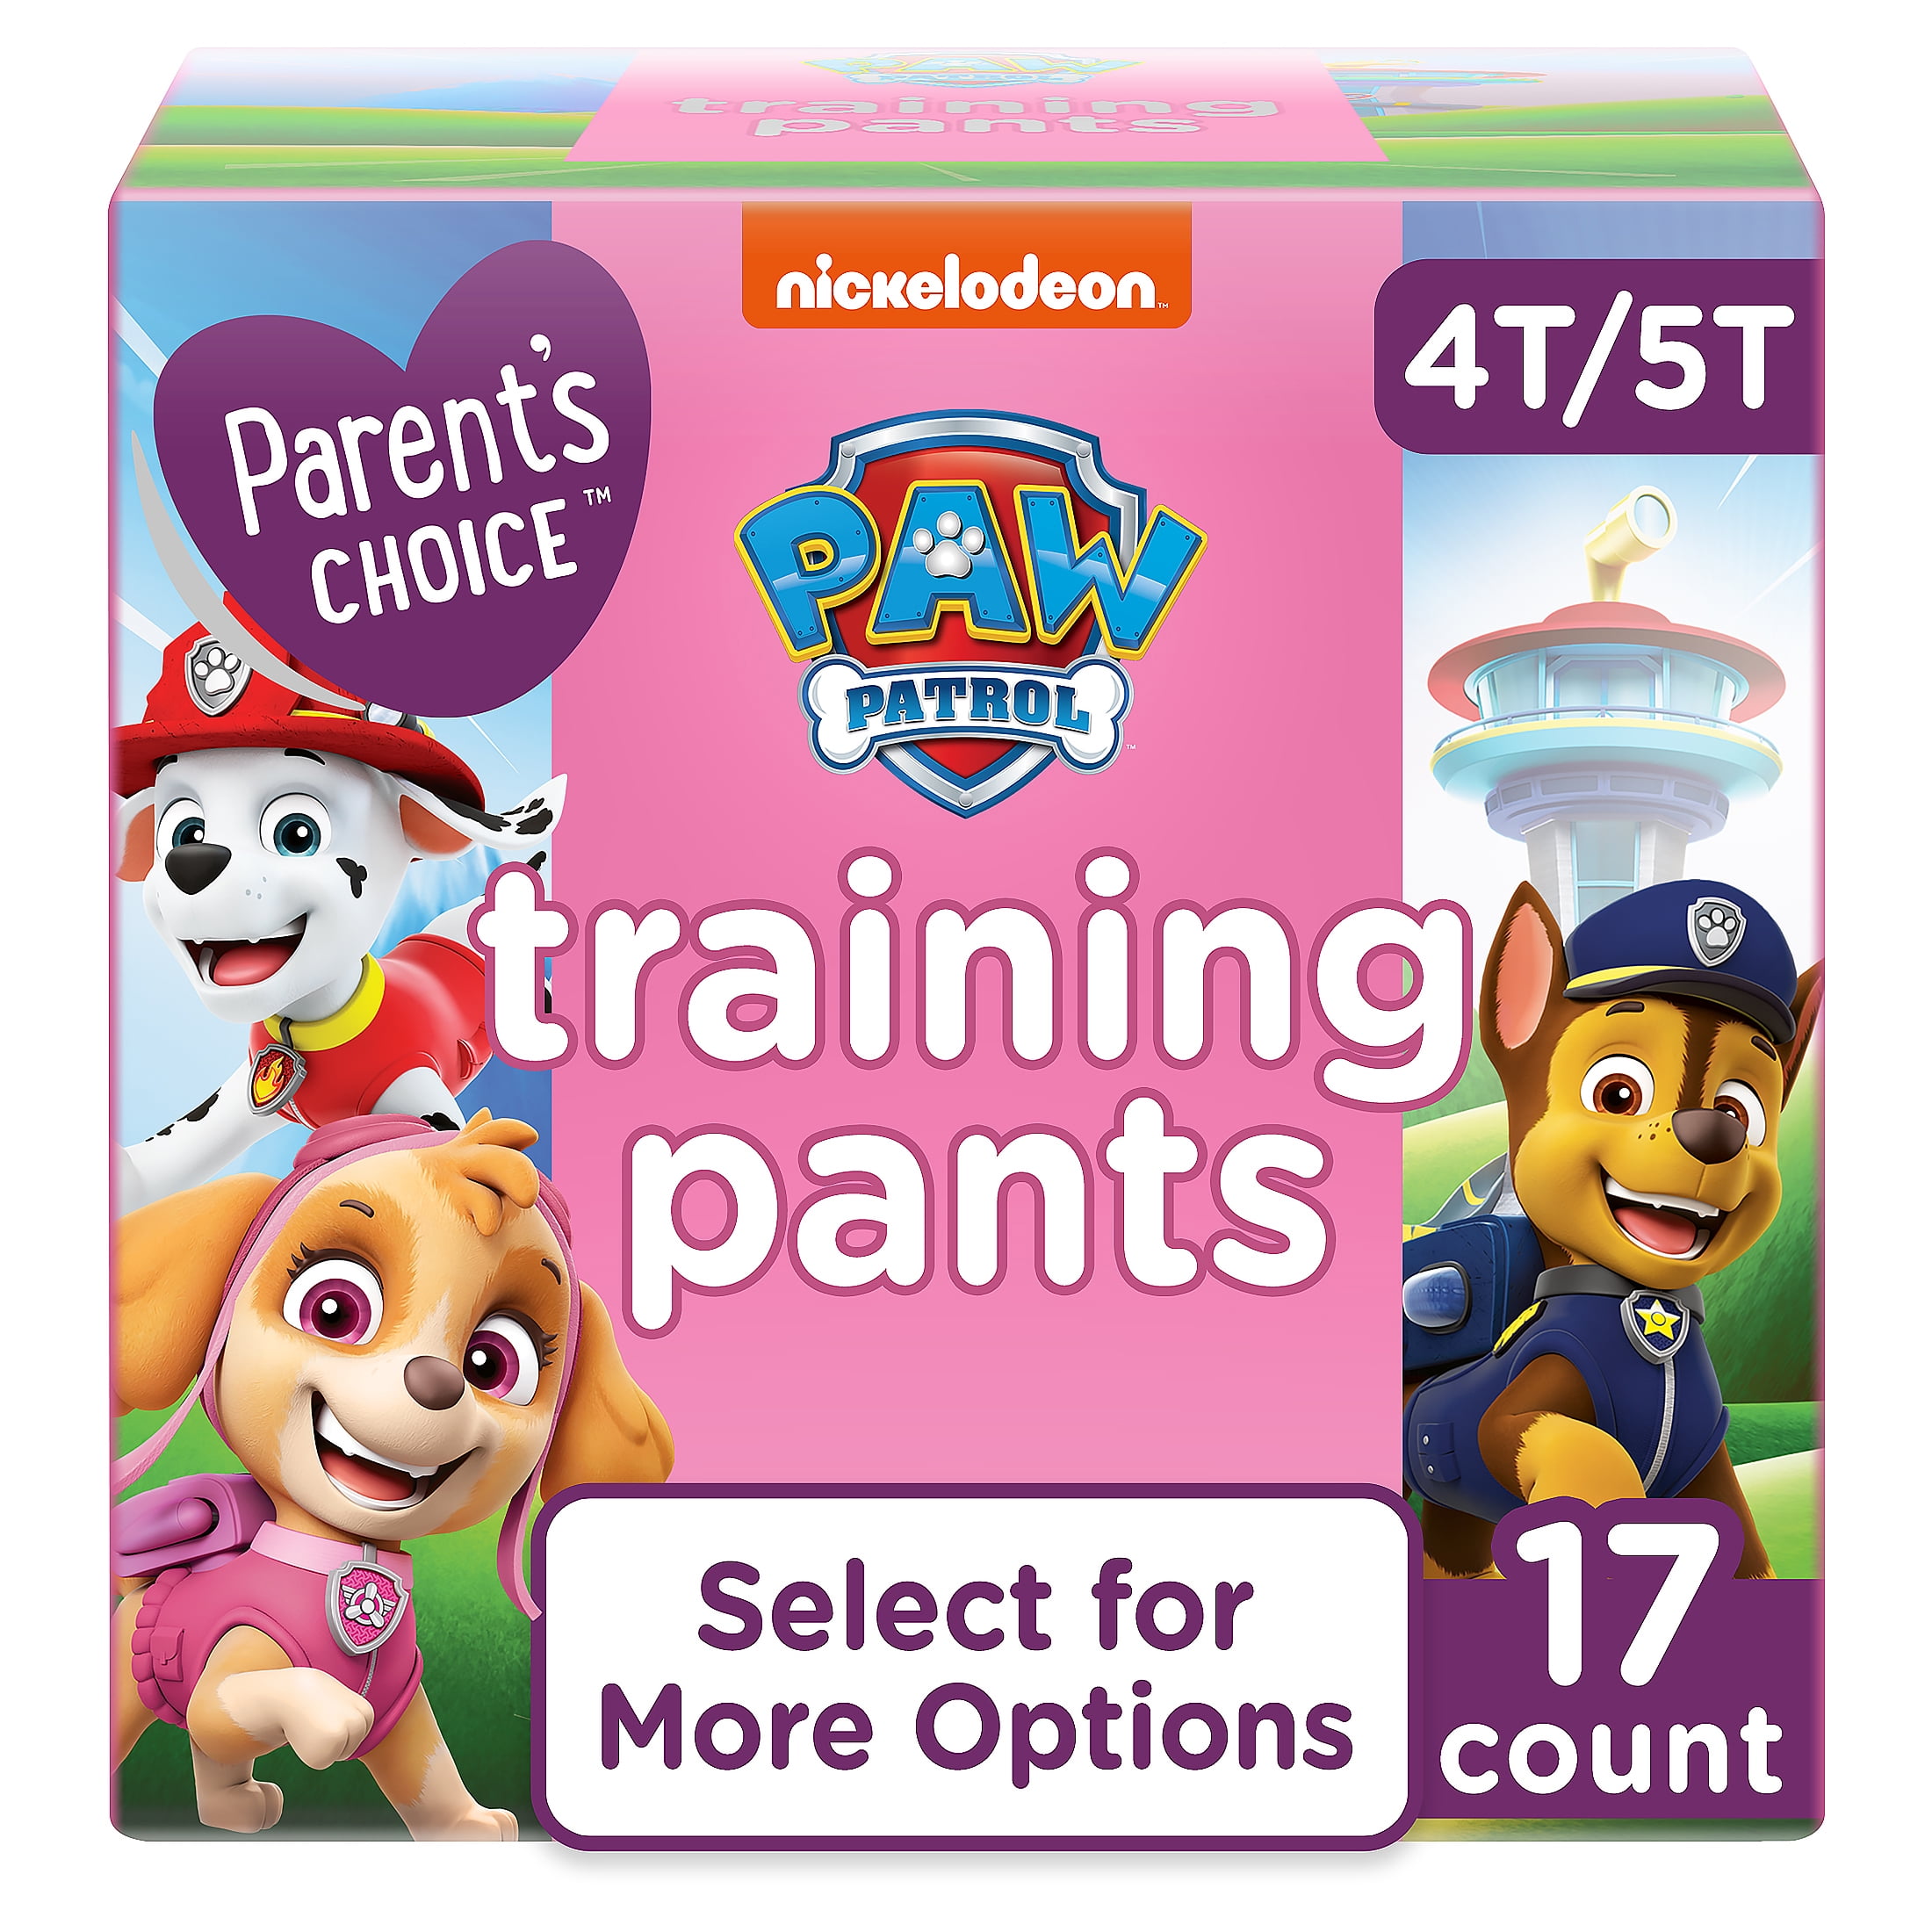 Parent's Choice Paw Patrol Training Pants for Girls, 4T/5T, 17 Count  (Select for More Options)